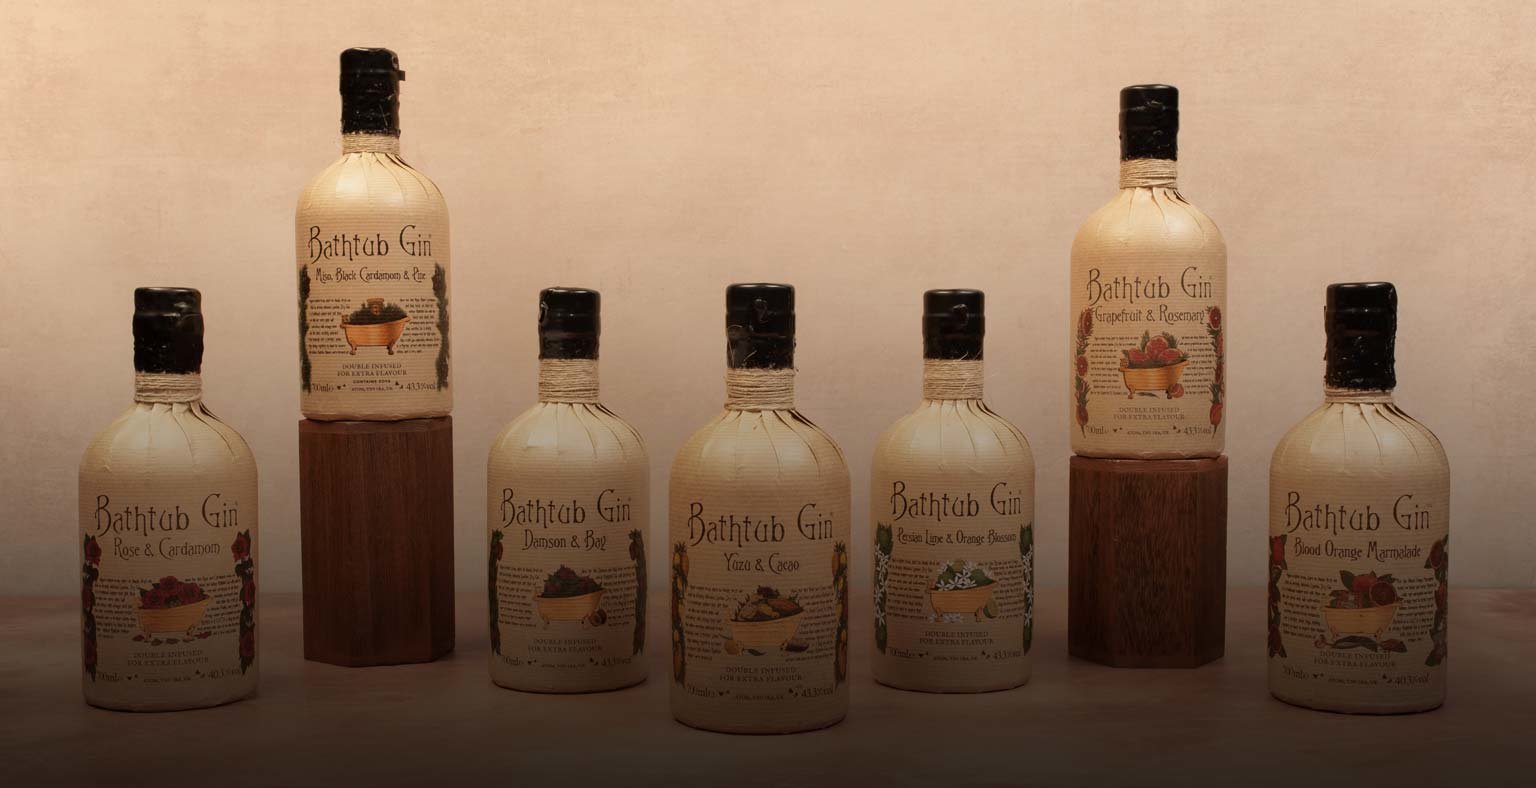 The Bathtub gin range lined up against a beige backing